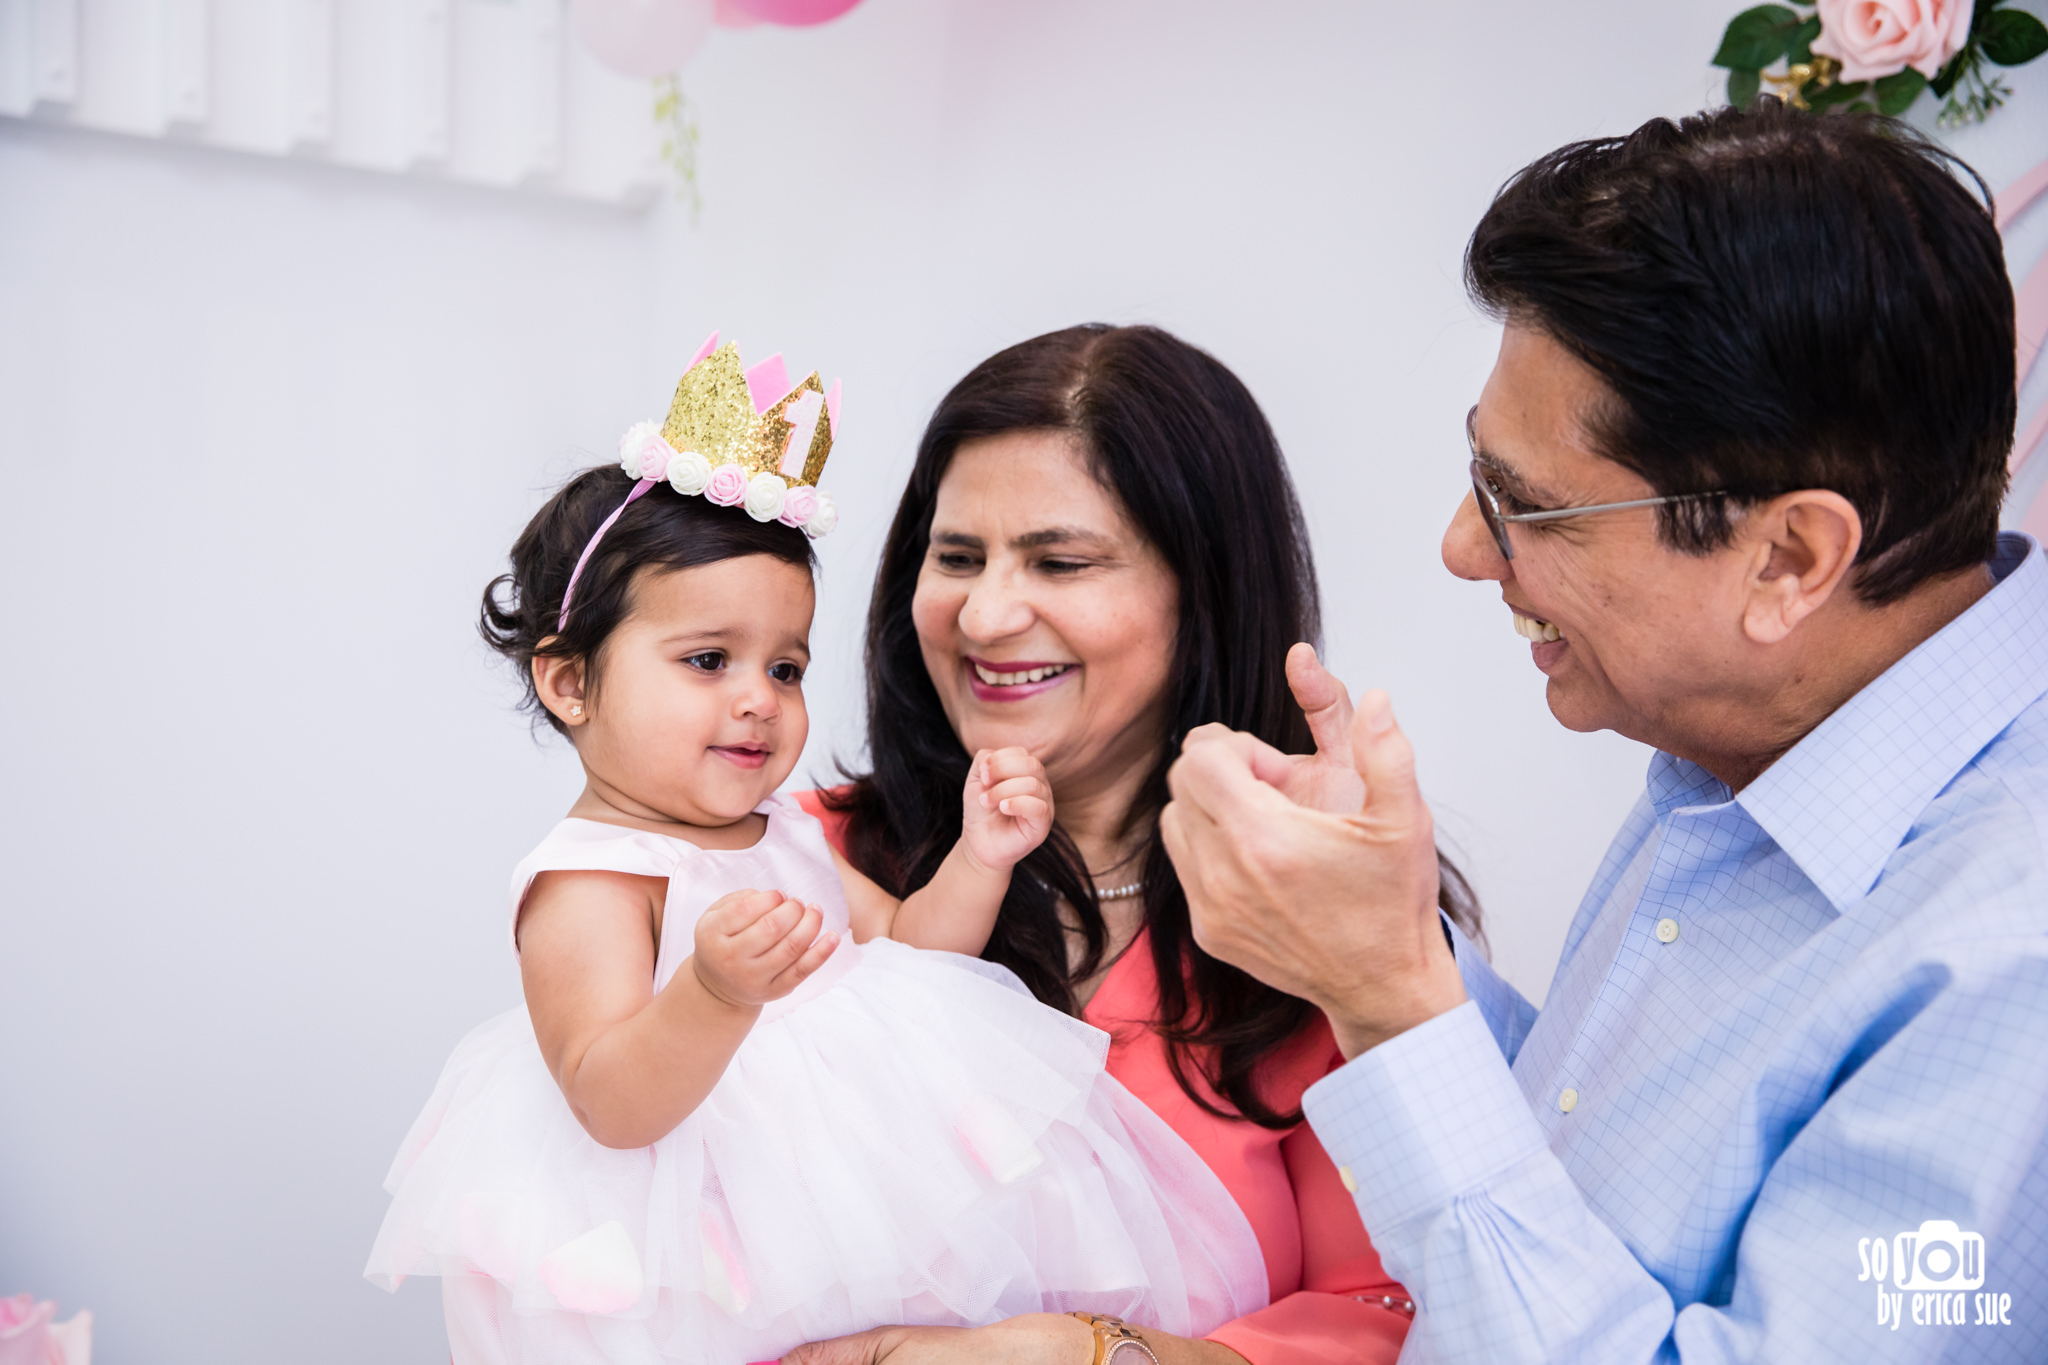 so-you-by-erica-sue-first-birthday-photographer-pembroke-pines-5987.jpg